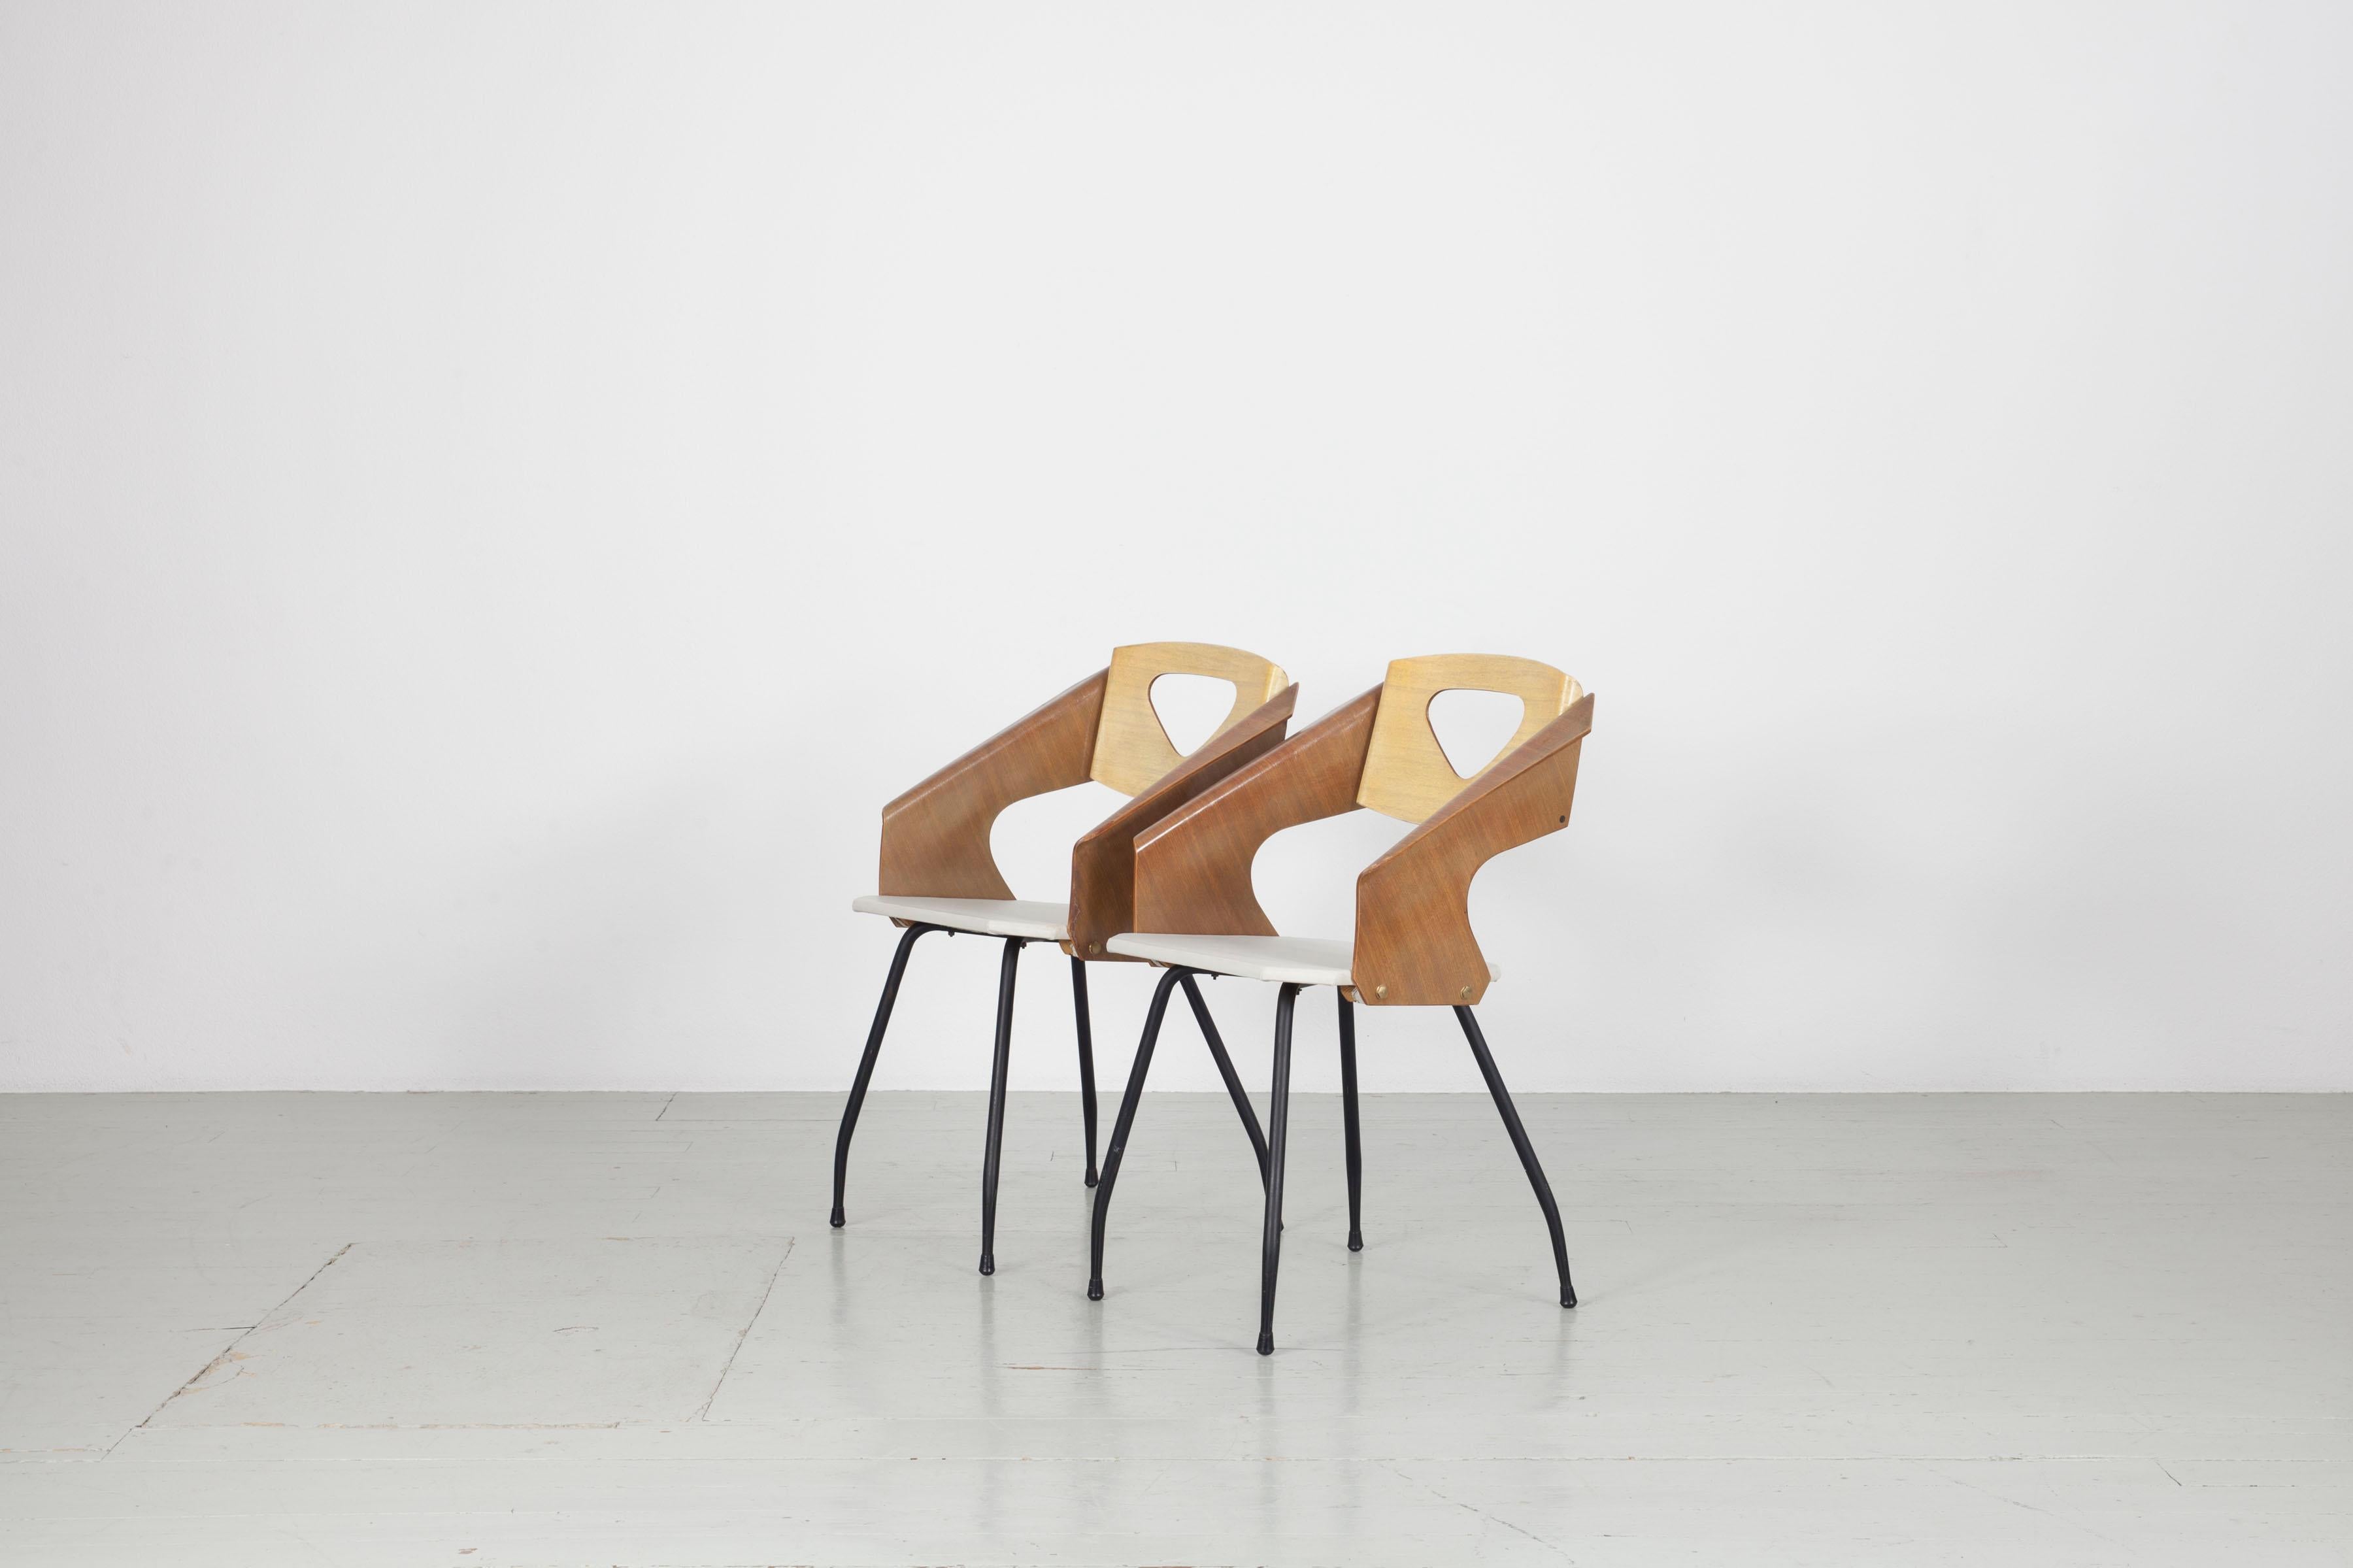 Mid-20th Century Set of 6 plywood chairs, 1950s, Carlo Ratti, Italy, Industria Legni Curvati For Sale